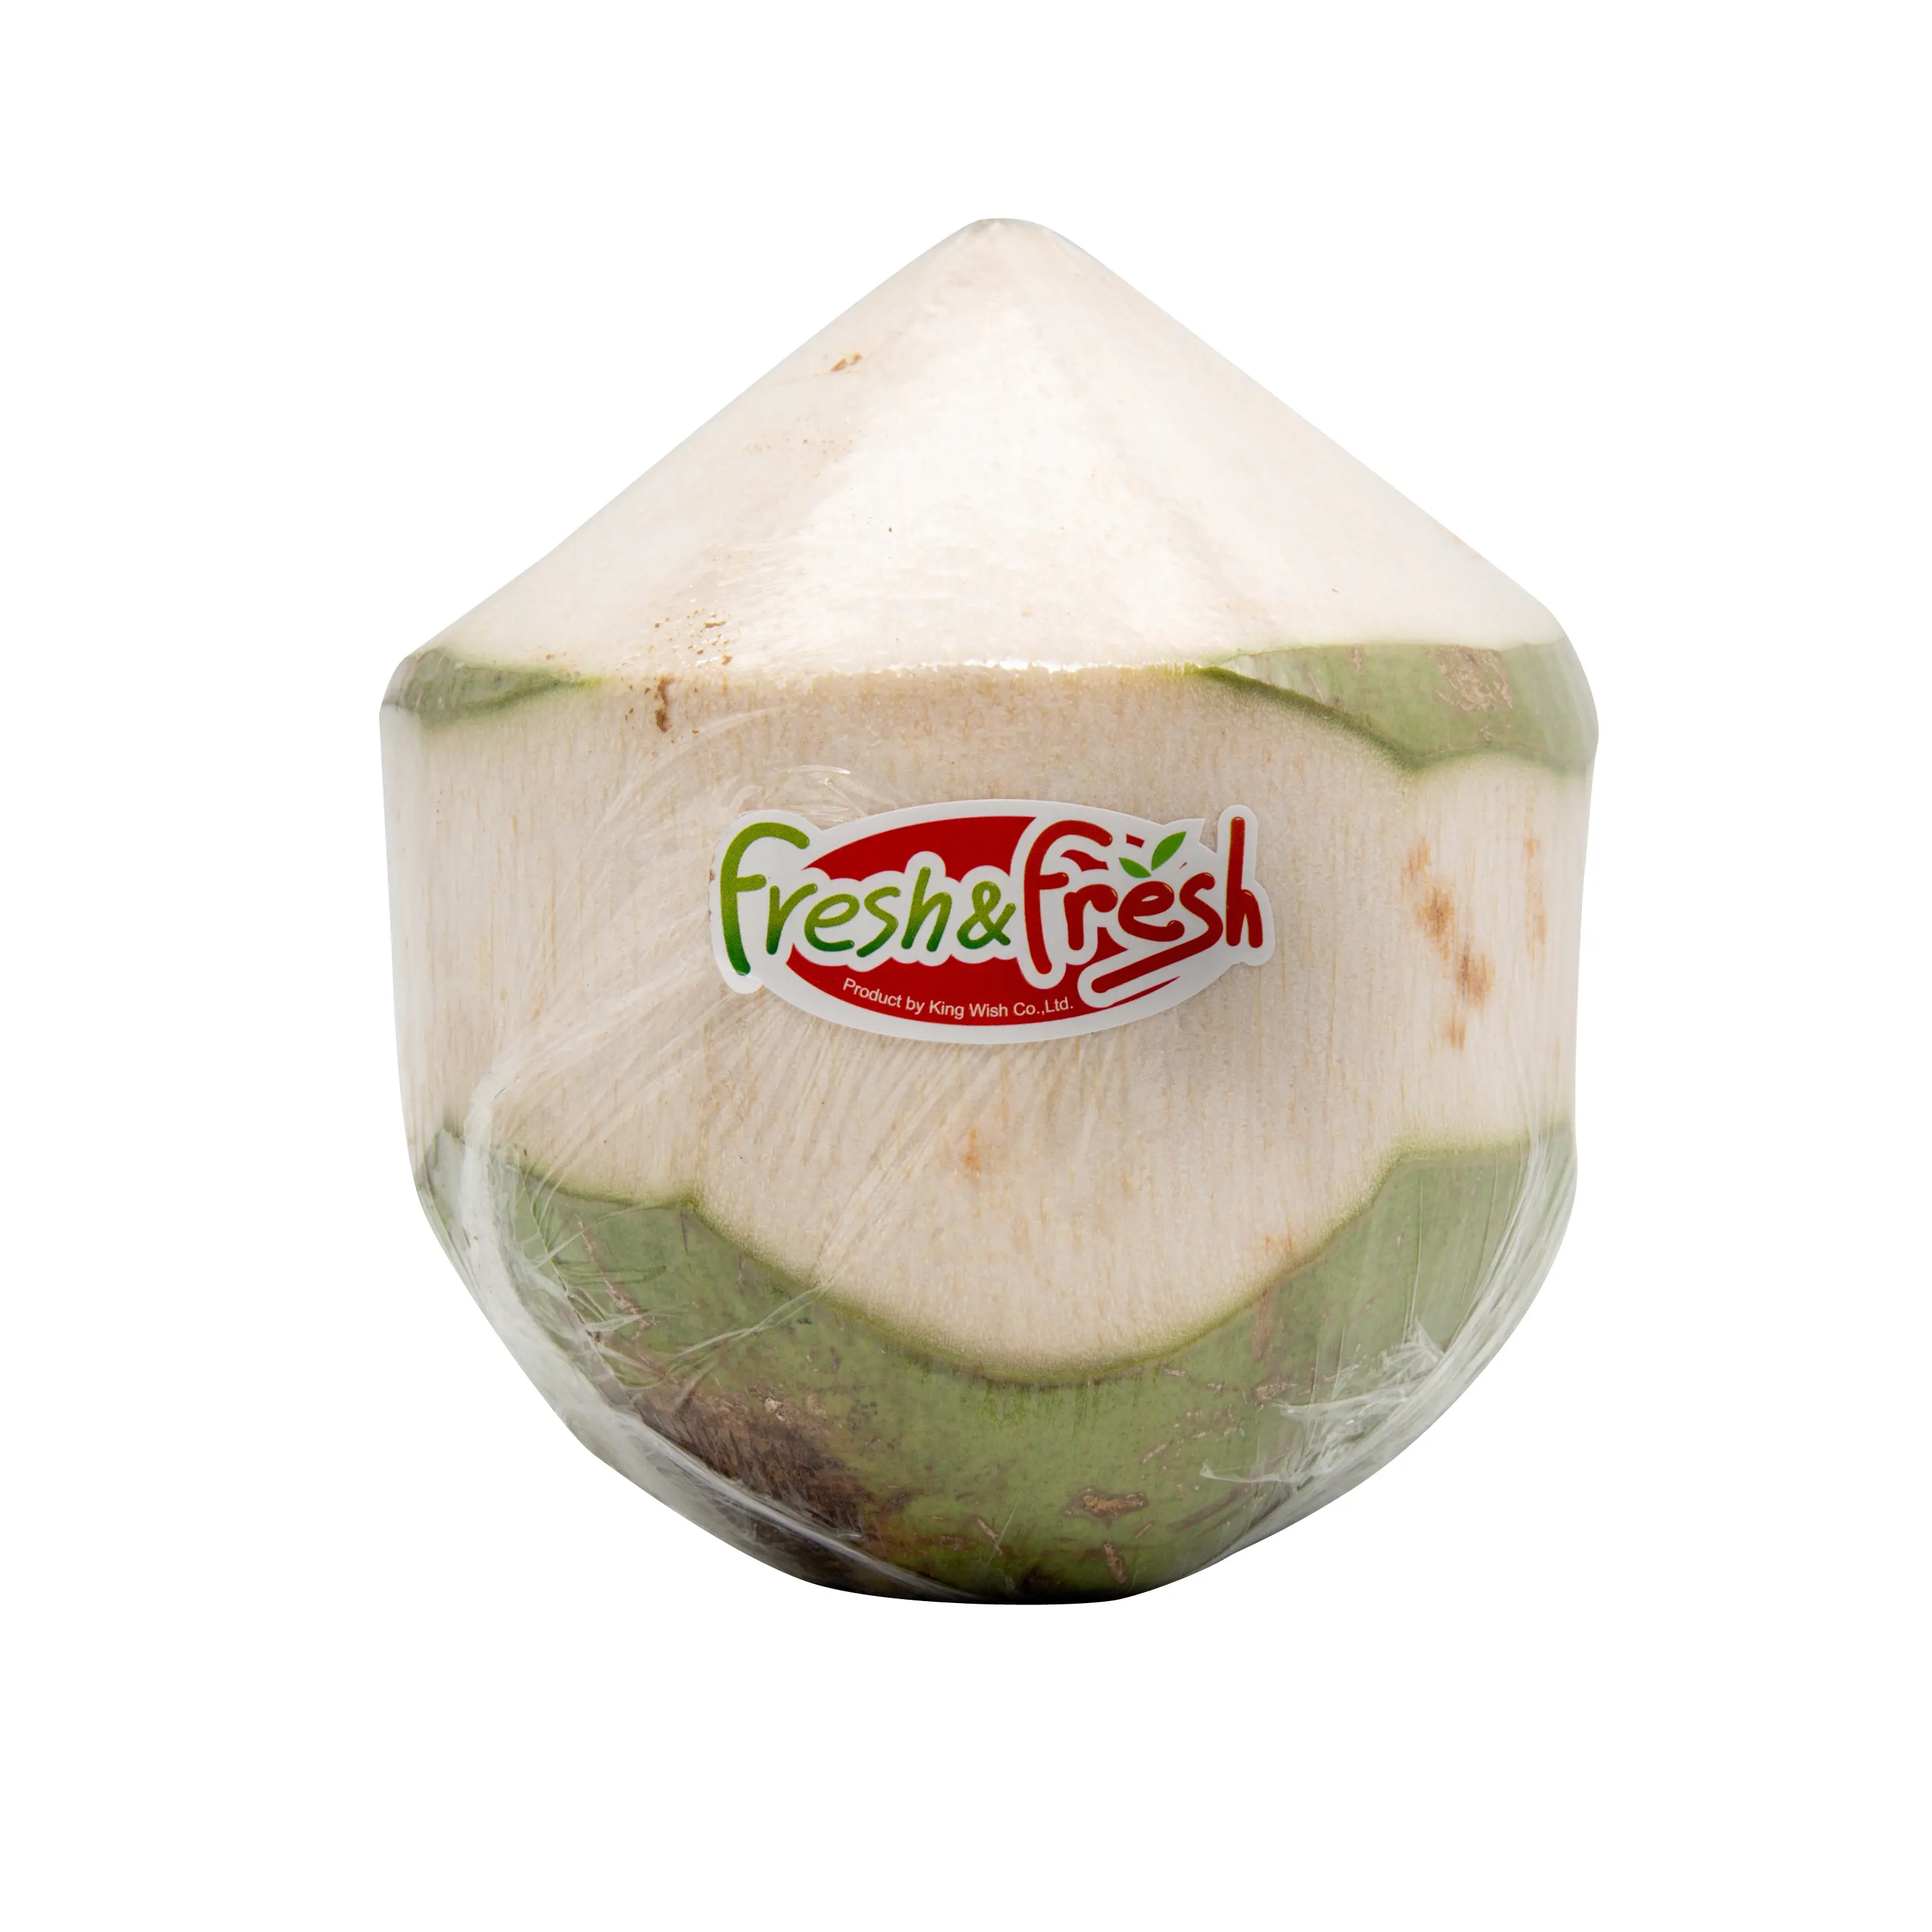 tropical fresh young coconut from Vietnam